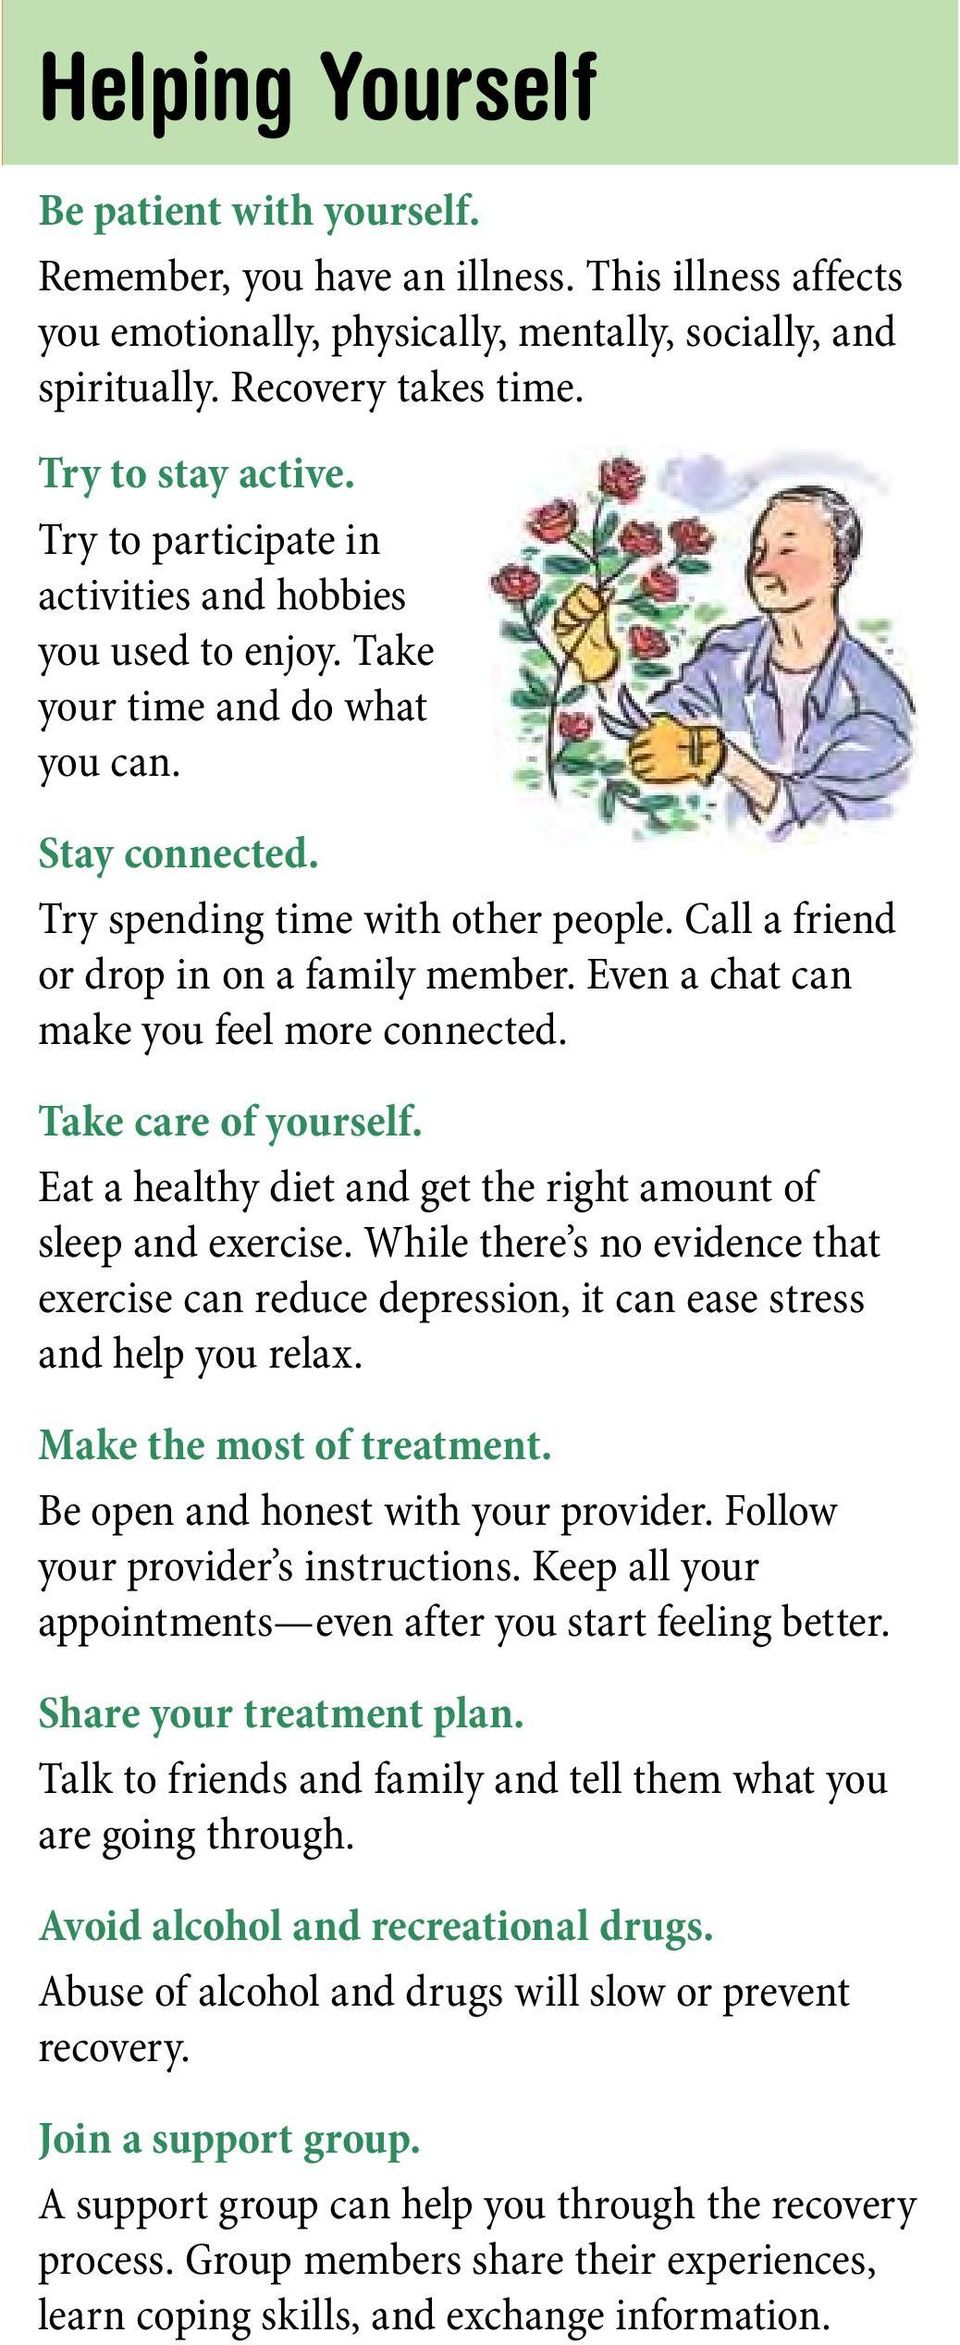 Call a friend or drop in on a family member. Even a chat can make you feel more connected. Take care of yourself. Eat a healthy diet and get the right amount of sleep and exercise.